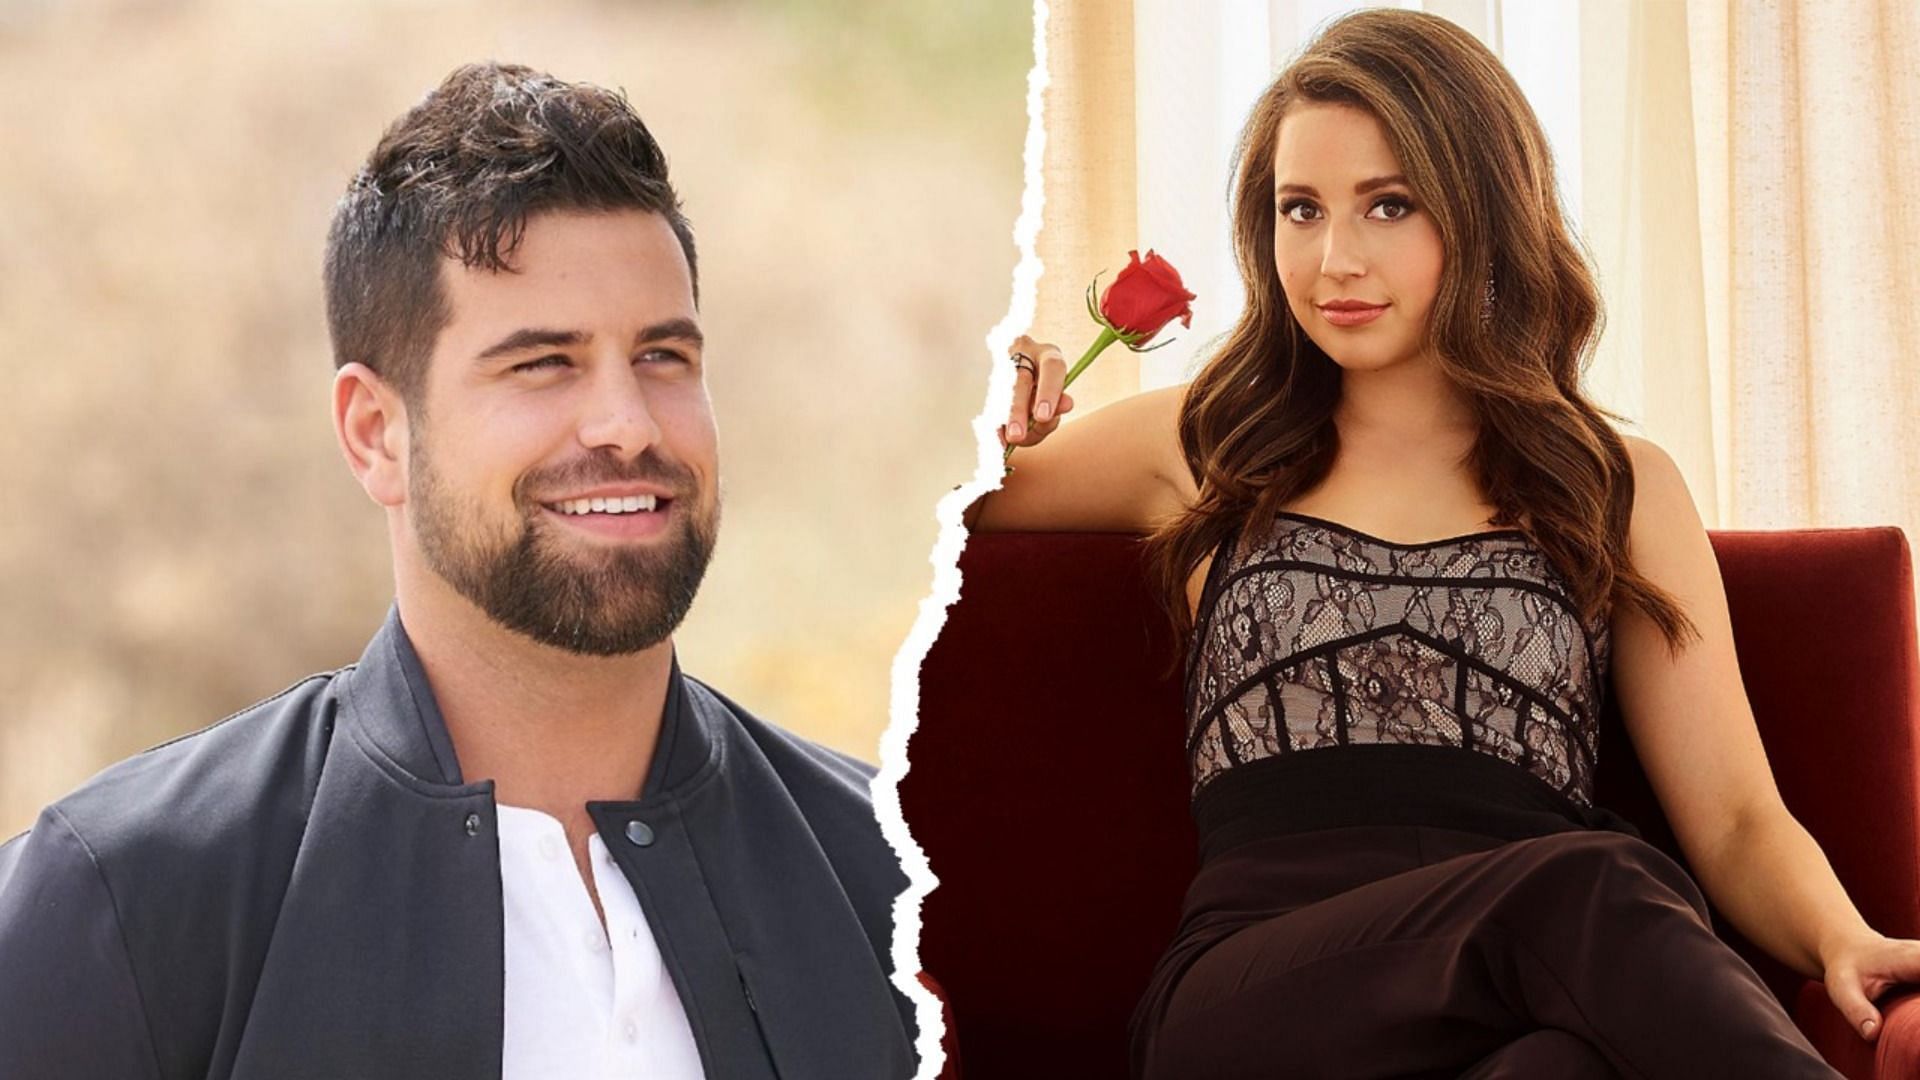 Katie Thurston and Blake Moynes have parted ways two months after engagement (Image via ABC/The Bachelorette)